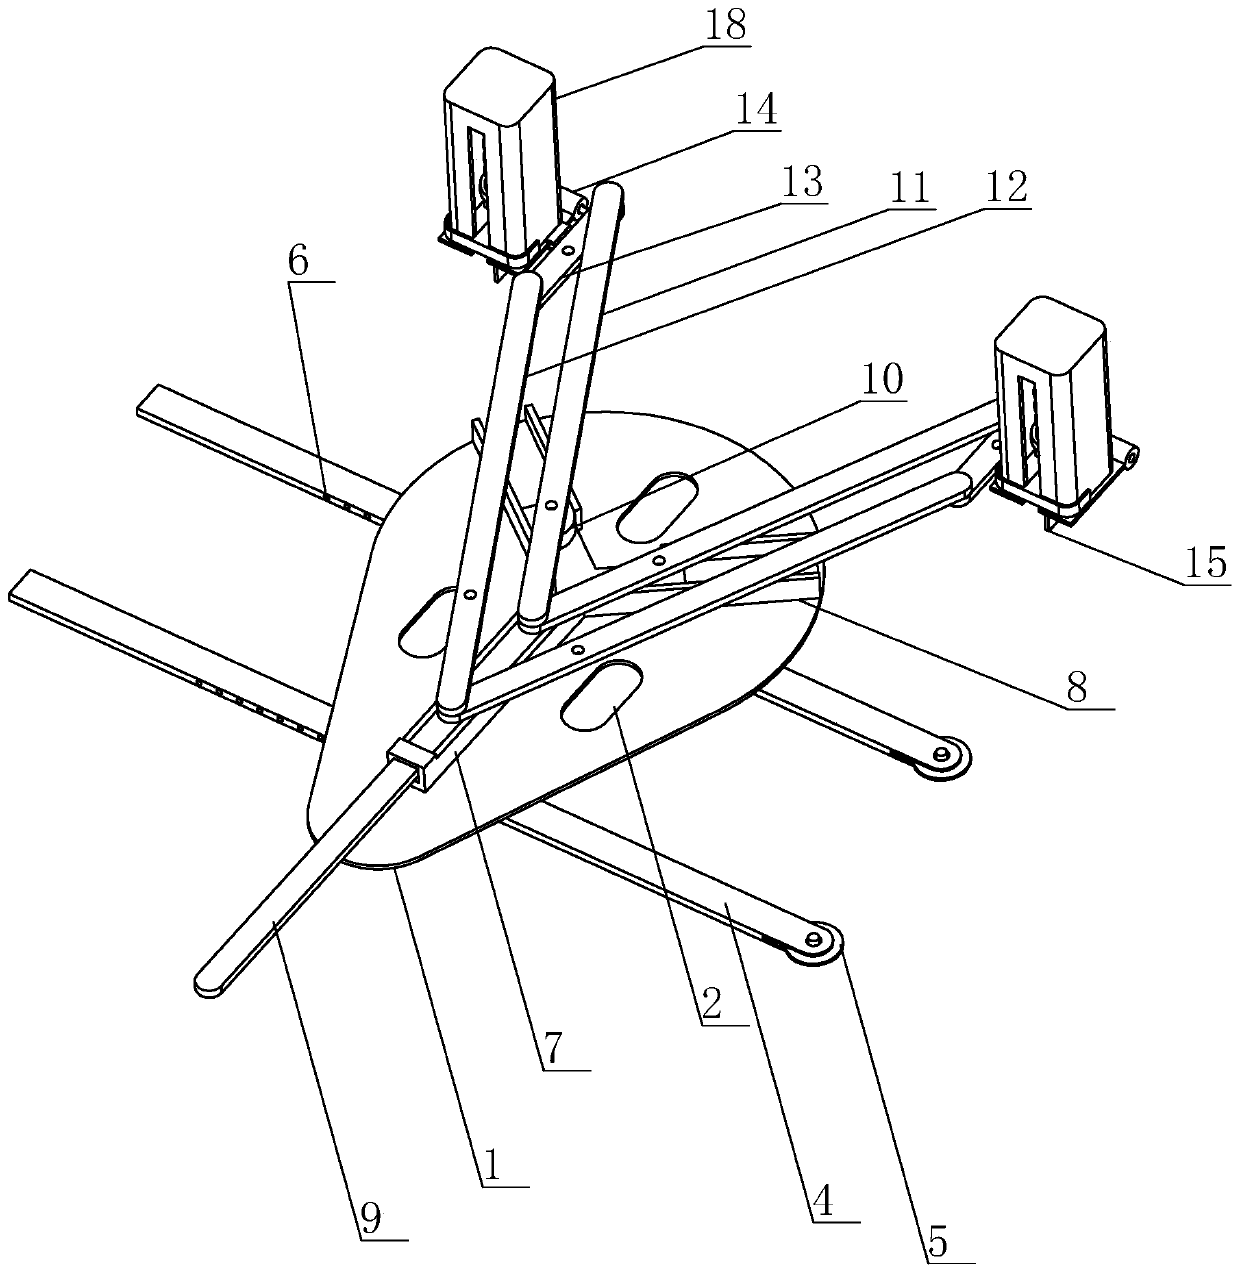 An electrical engineering positioning installation device